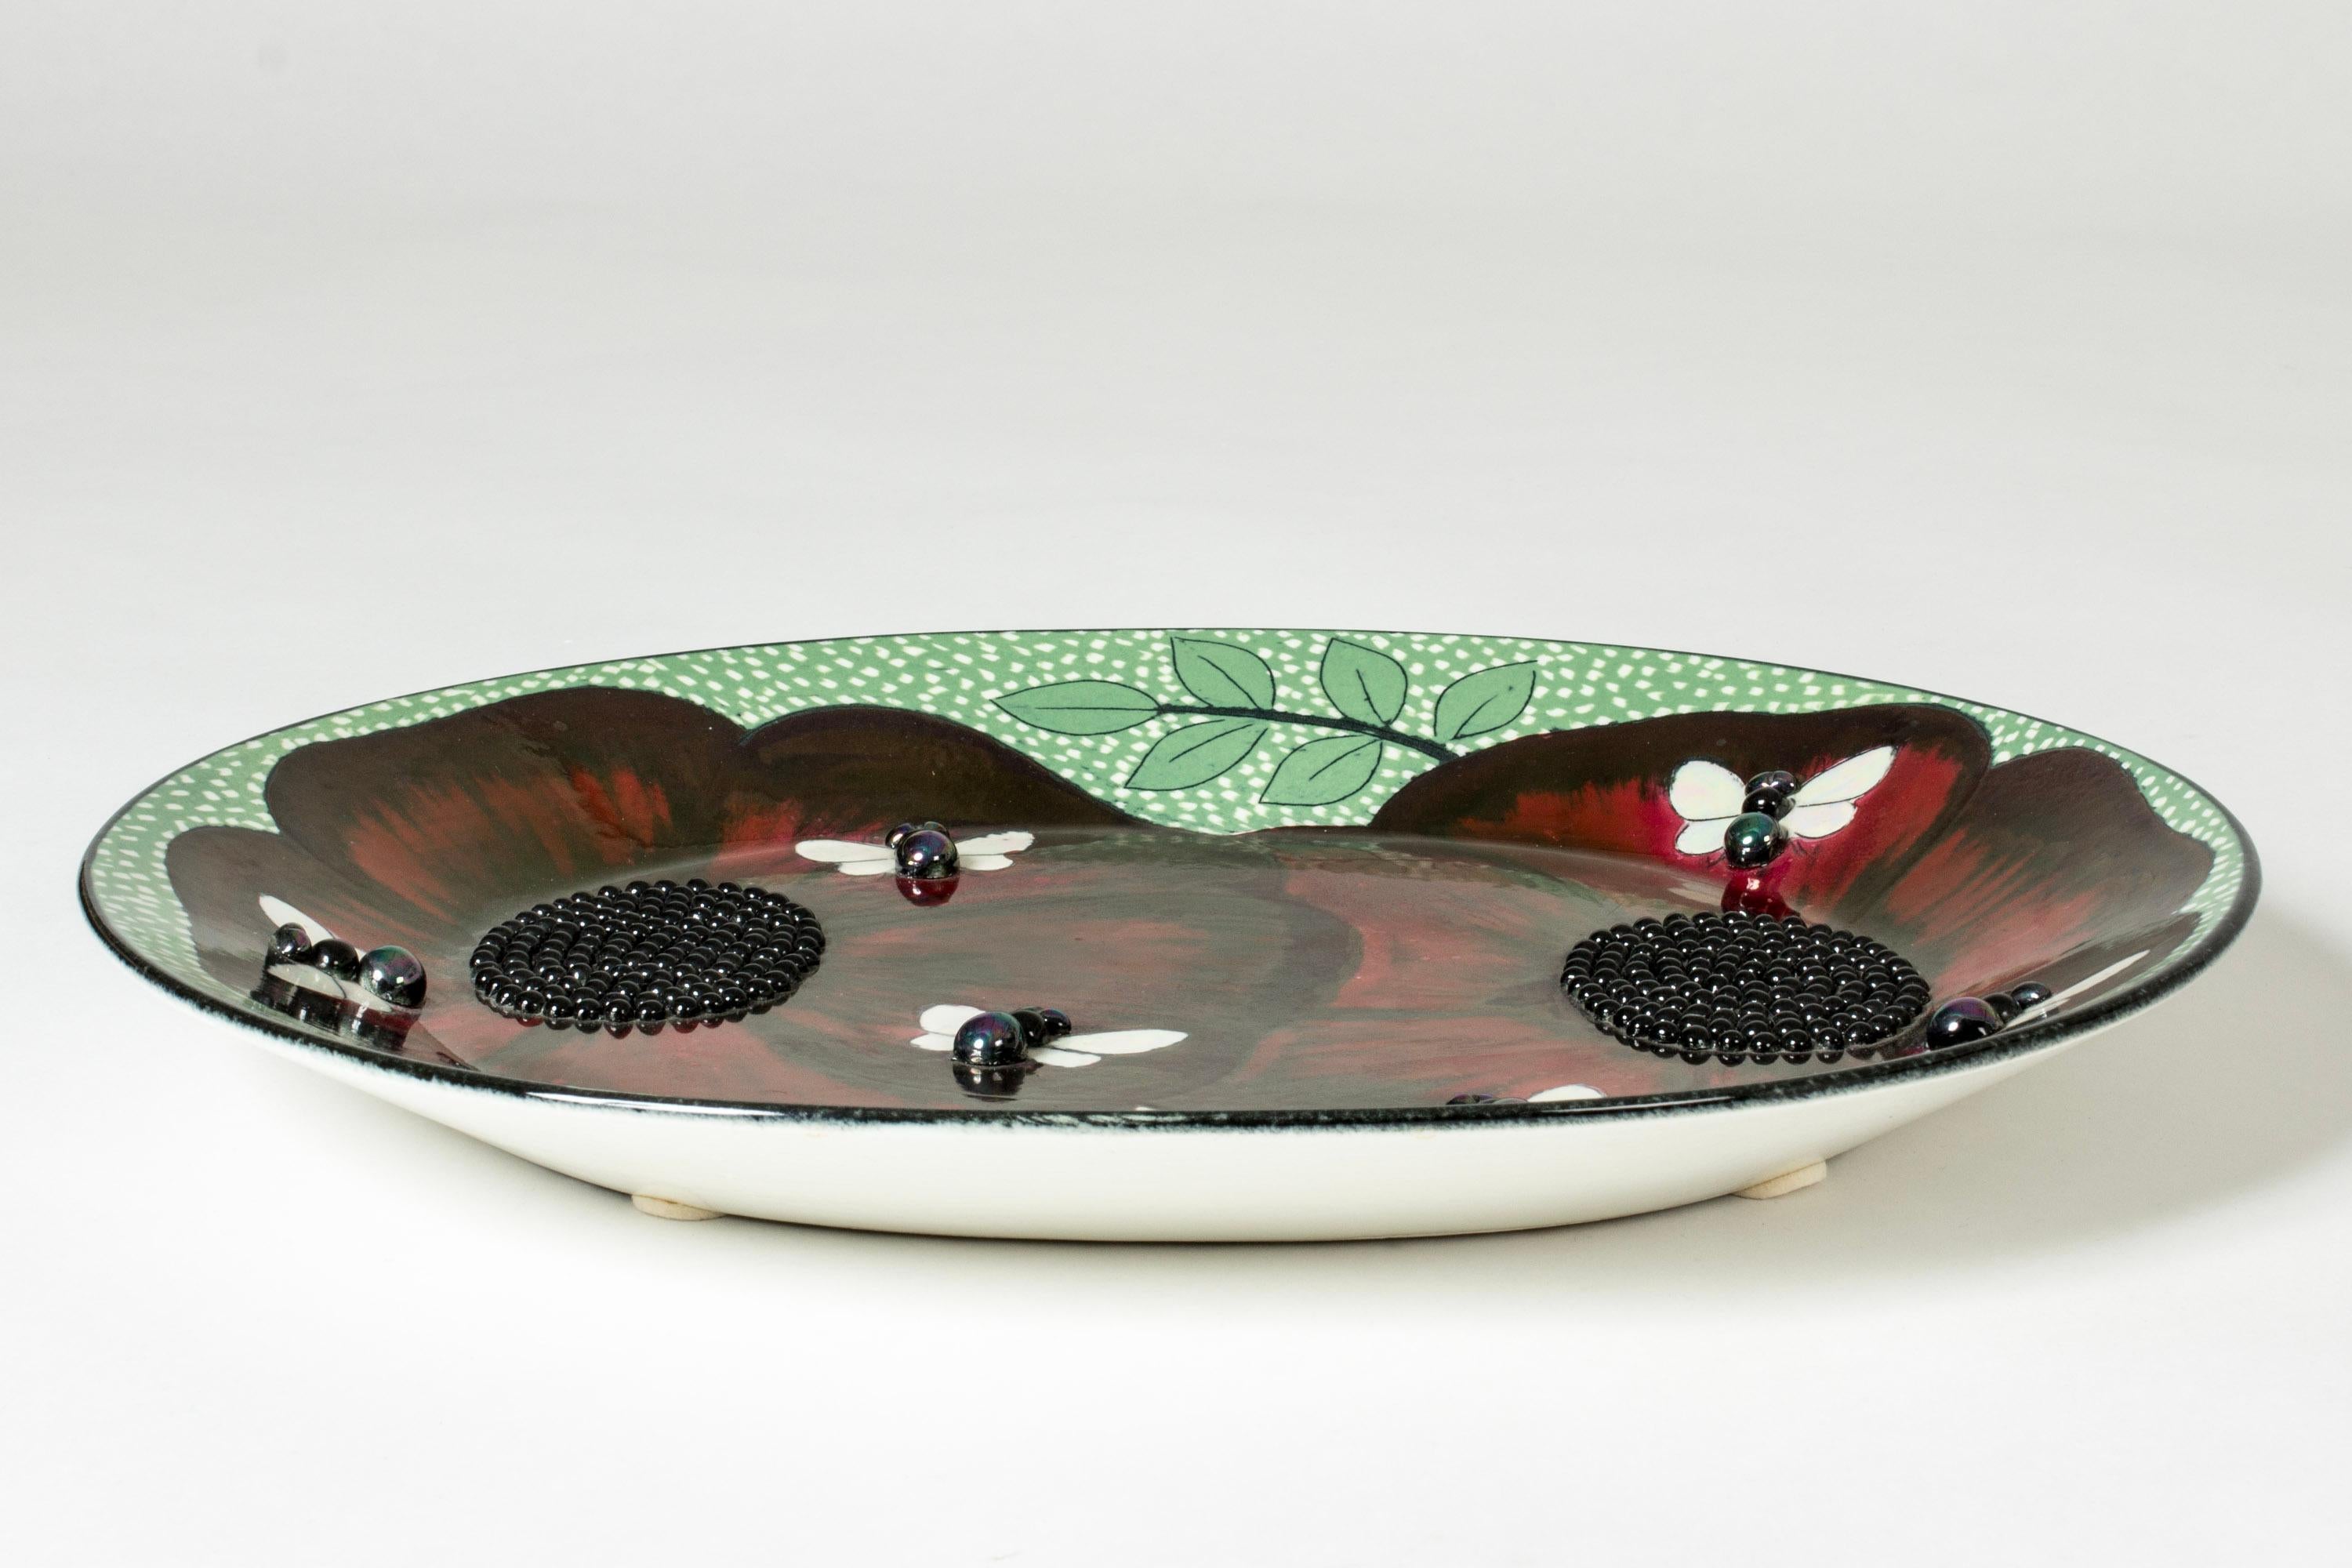 Amazing, unique stoneware platter by Birger Kaipiainen. Beautiful composition with deep red poppy flowers with seeds in relief in the center and butteflies scattered on the petals.

Birger Kaipiainen was Finland’s foremost ceramic artist of the